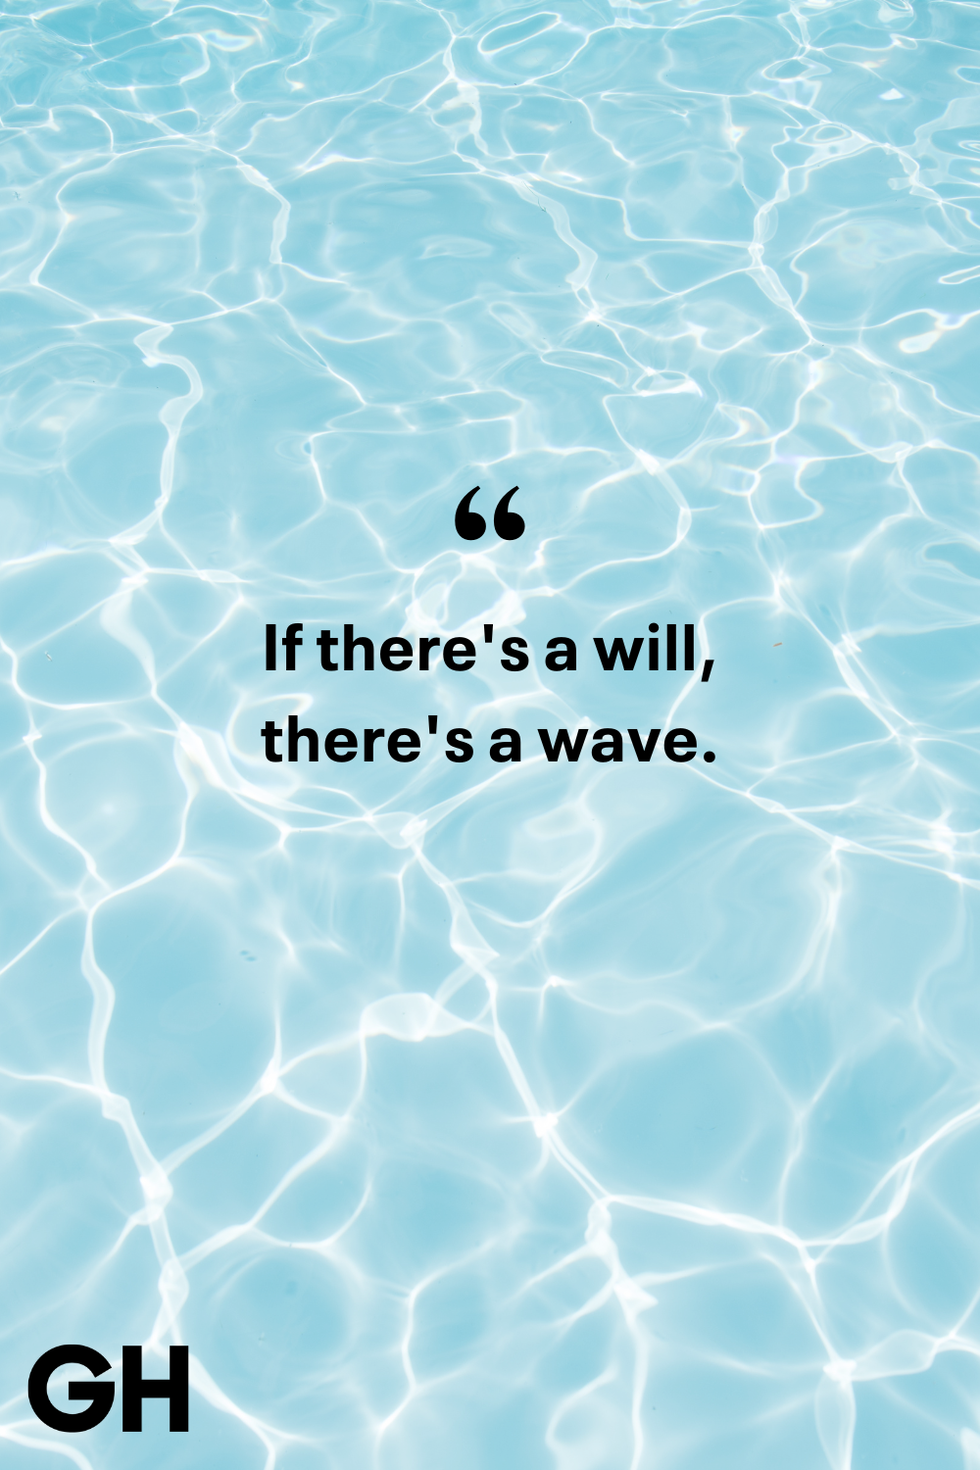 if there's a will, there's a wave